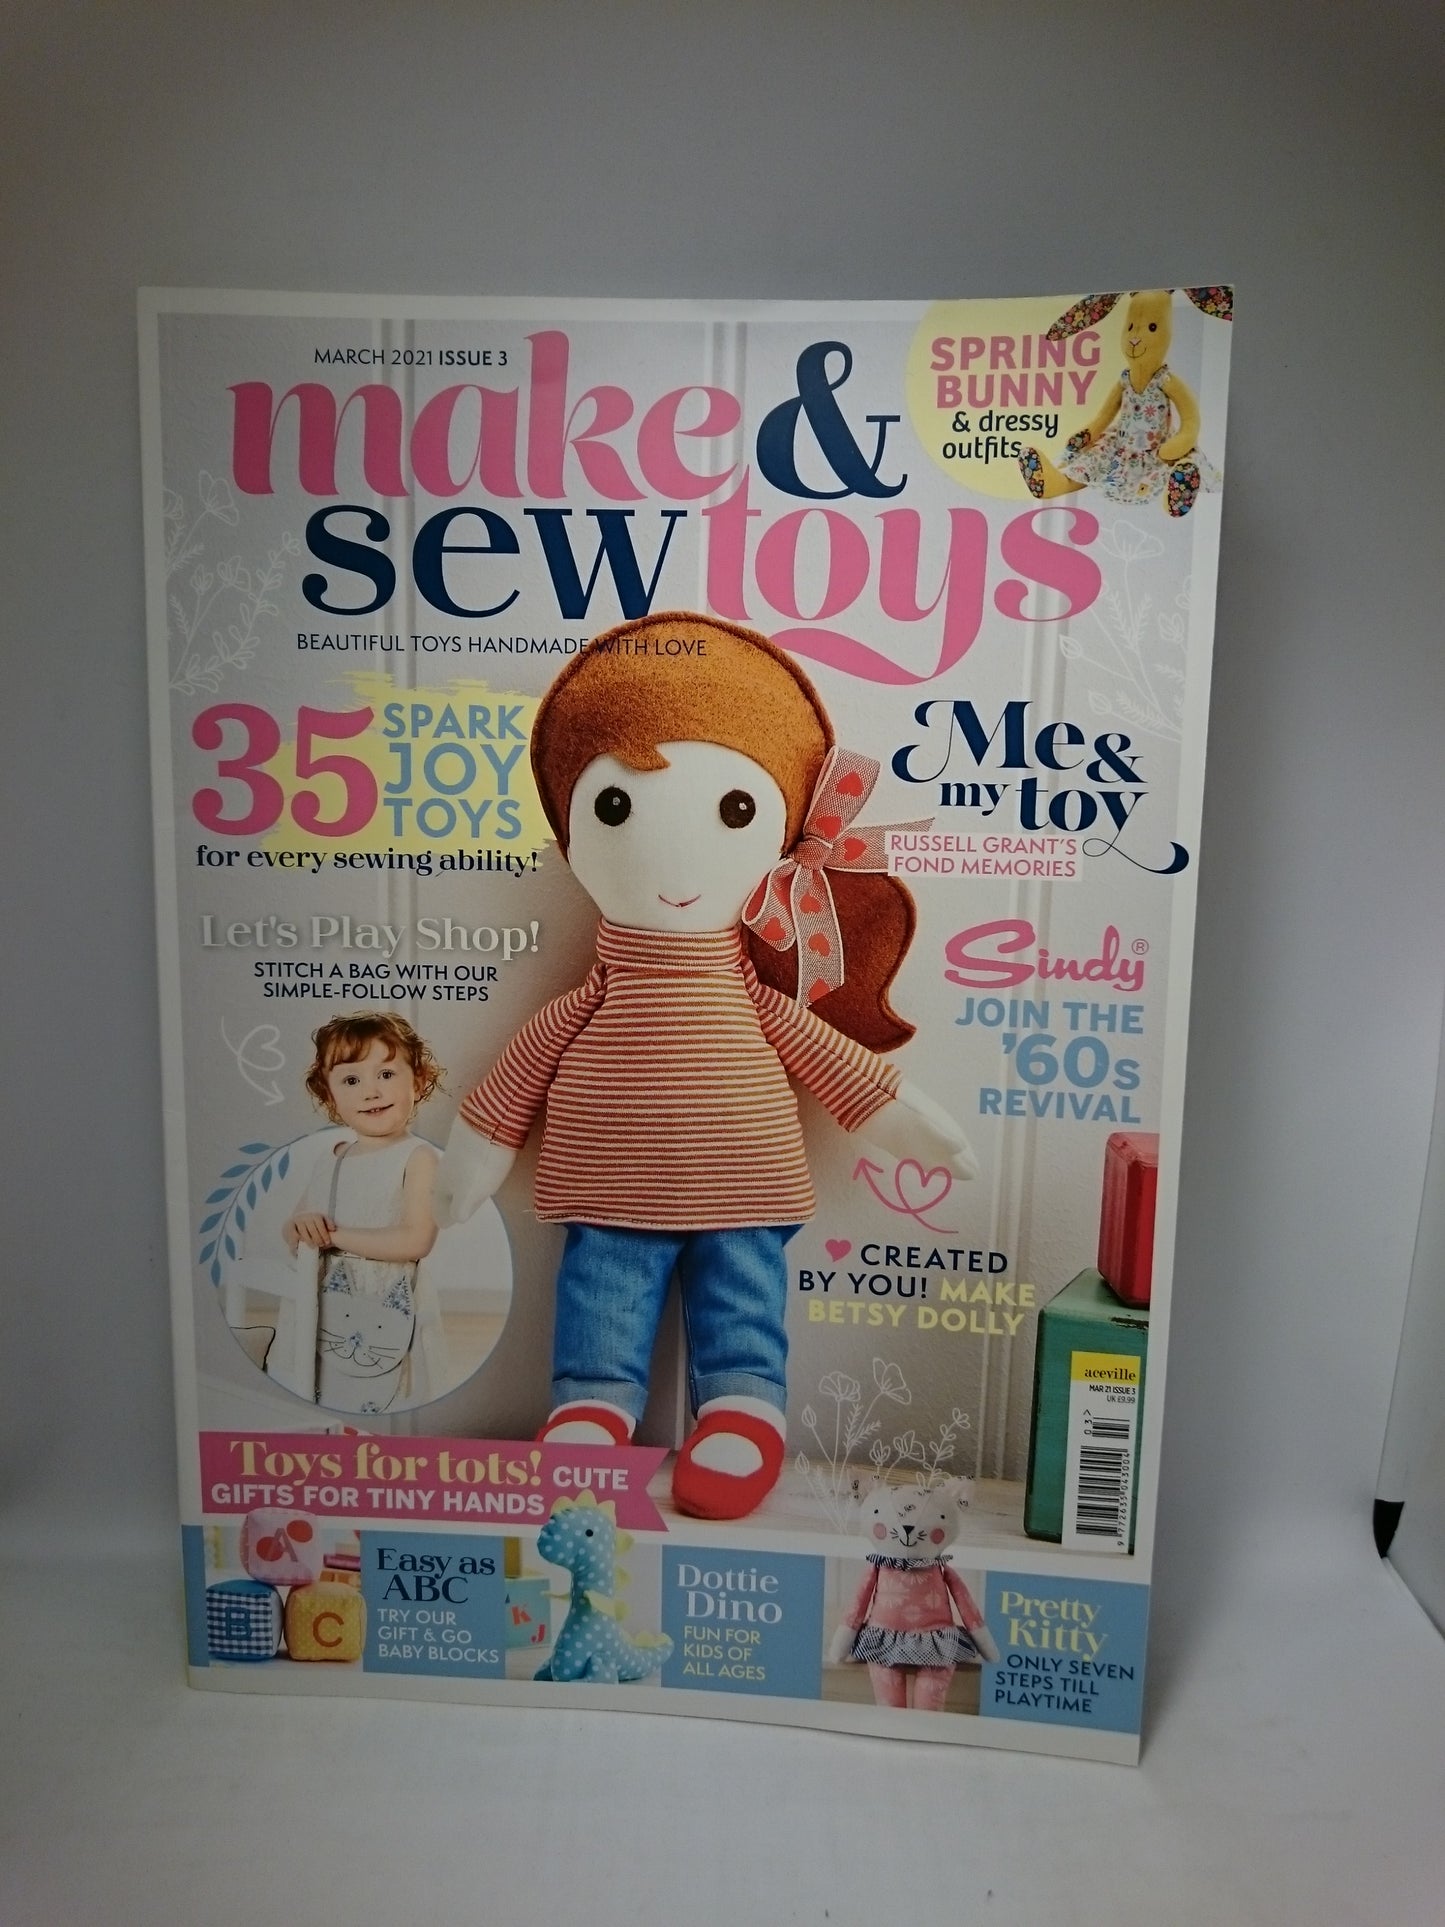 Make And Sew Toys: Beautiful Toys Handmade With Love